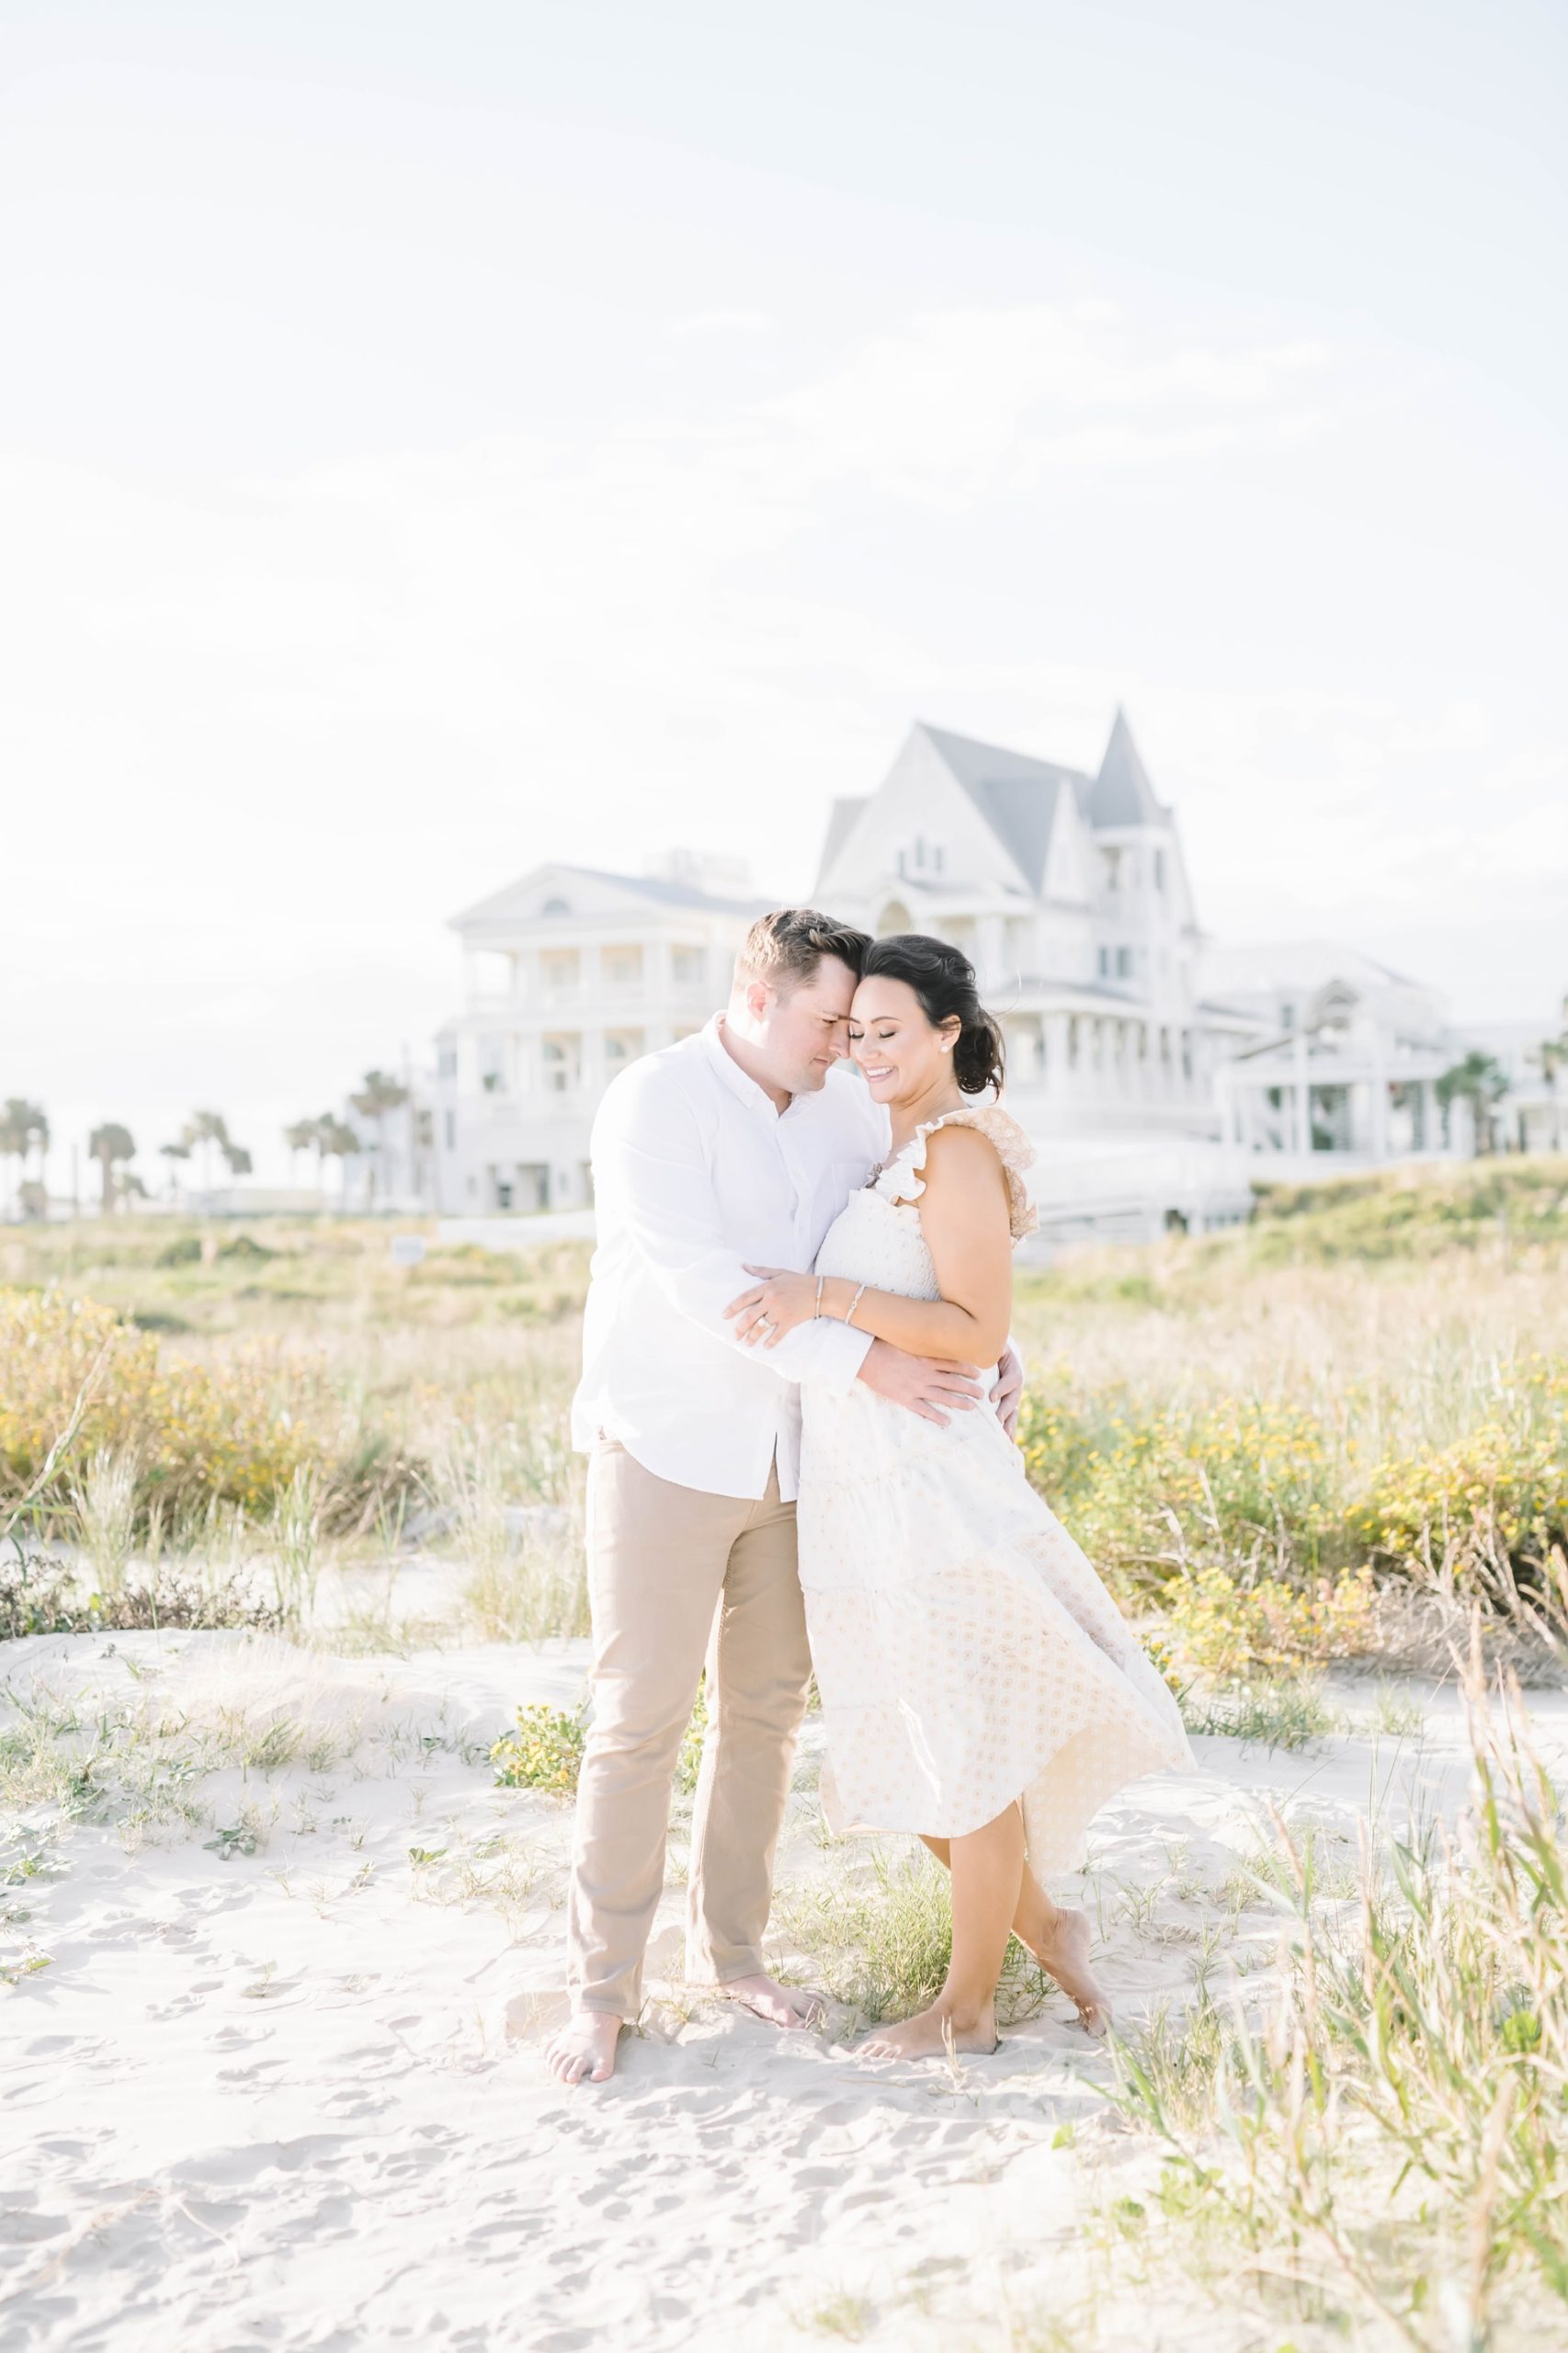 A husband snuggles into his pregnant wife on a white sand beach in Galveston by Christina Elliott Photography. husband snuggles wife #ChristinaElliottPhotography #ChristinaElliottMaternity #Galvestonmaternityphotographers #maternityportraits